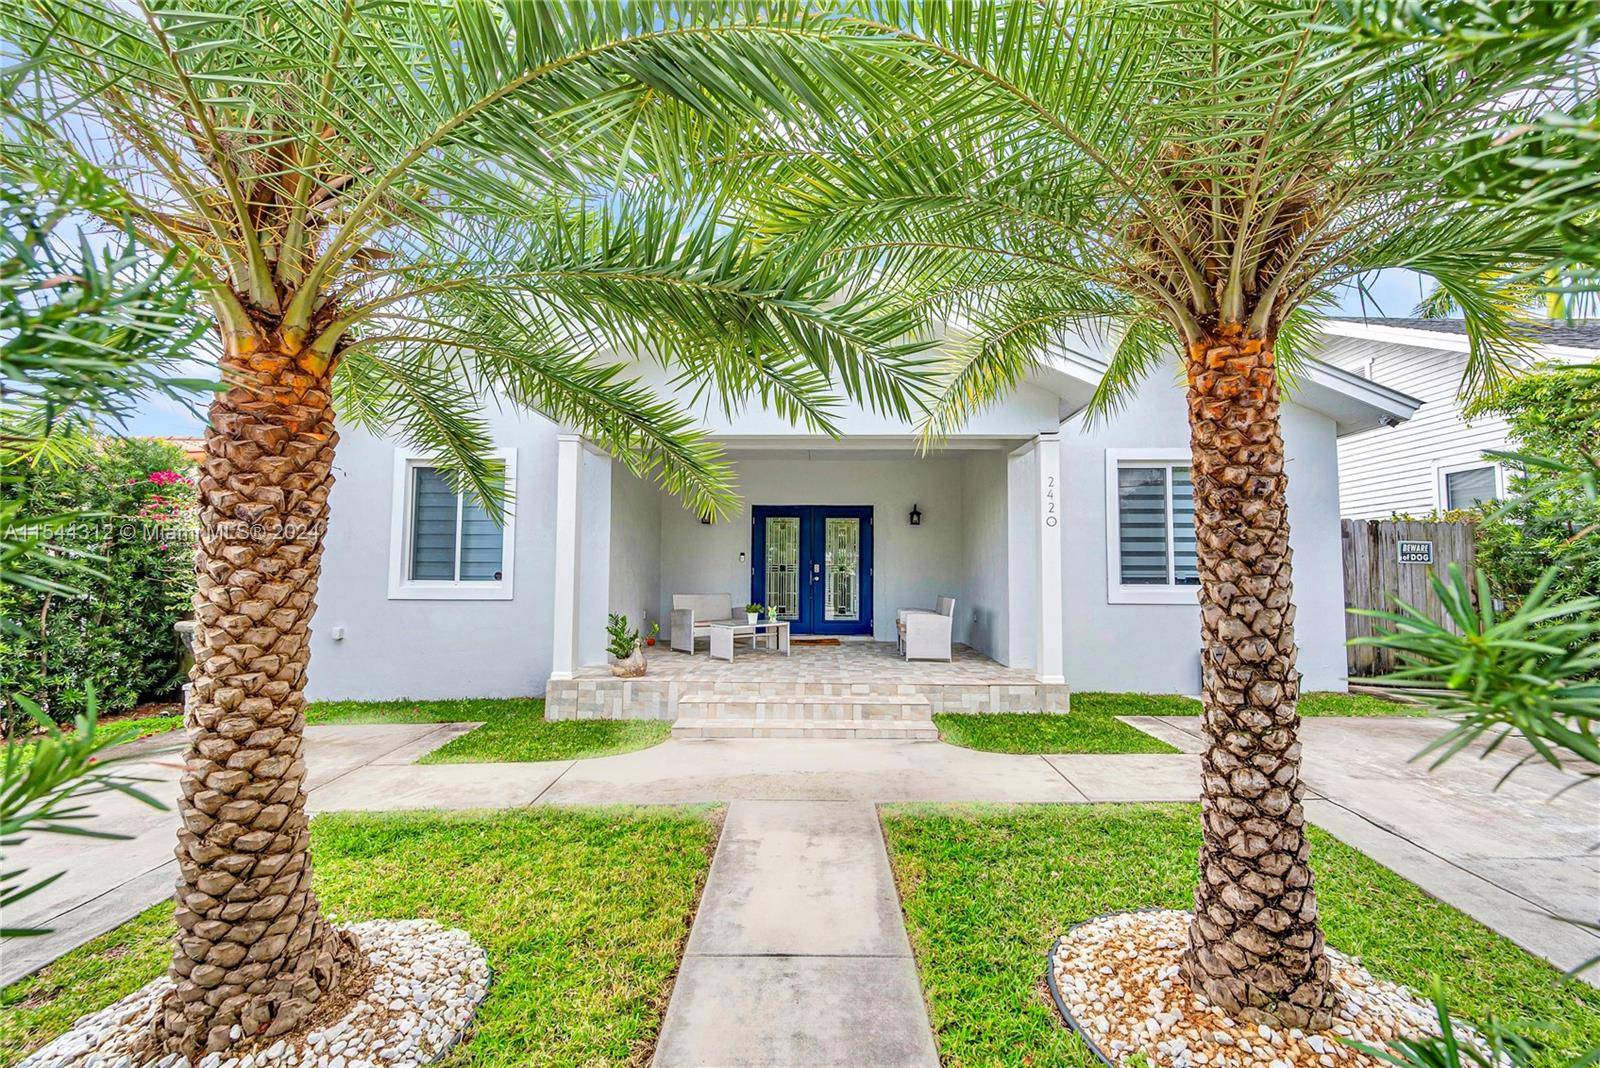 Nestled in the desirable Coral Way neighborhood, this modern single family home, built in 2014, boasts 4 bedrooms and 2.